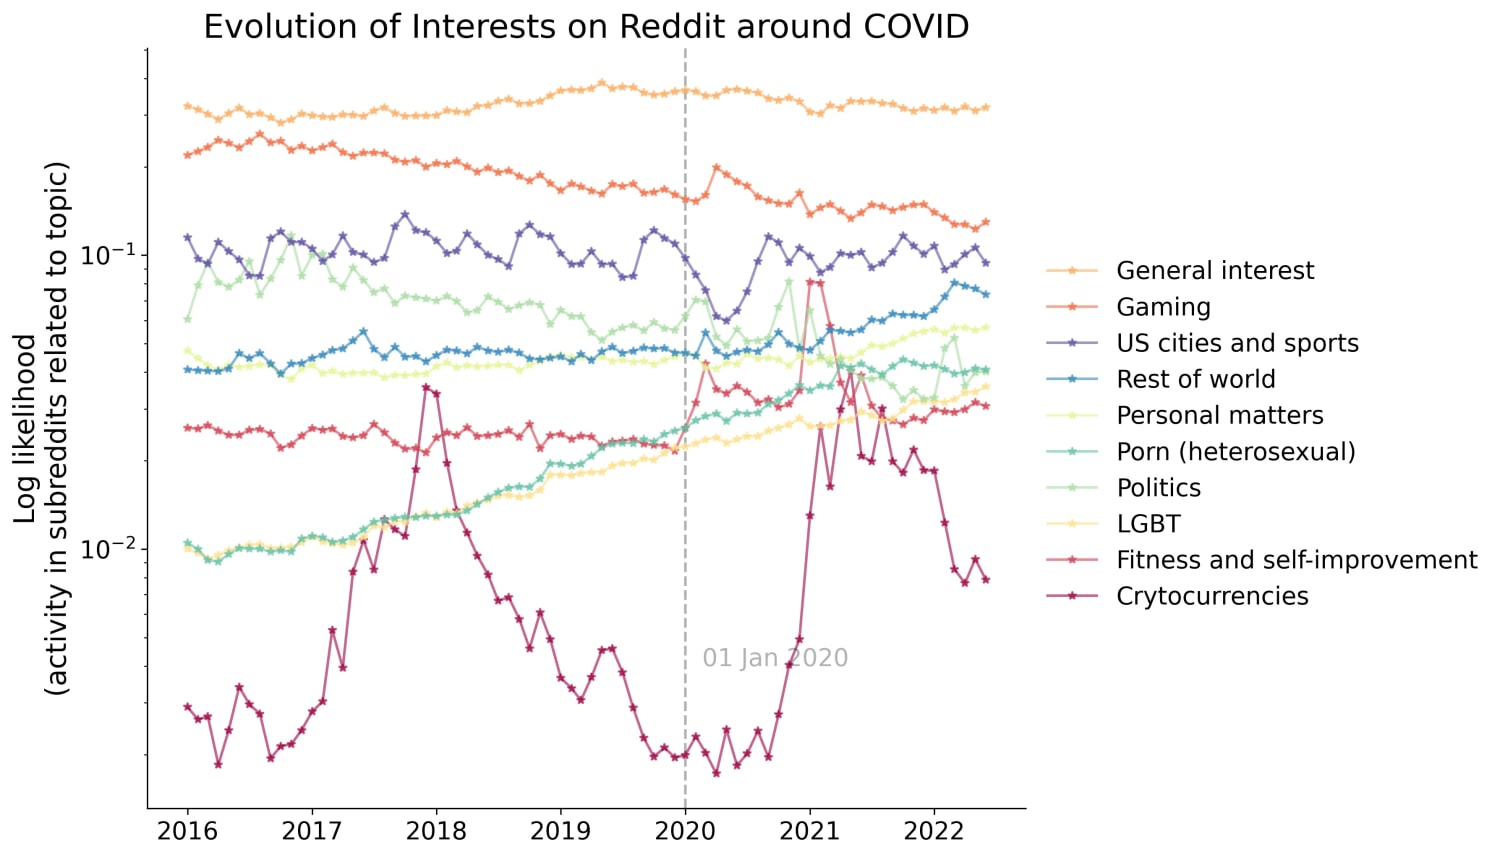 : Reddit interest in "fitness and self-improvement" as well as "gaming" saw a dramatic increase in activity after COVID